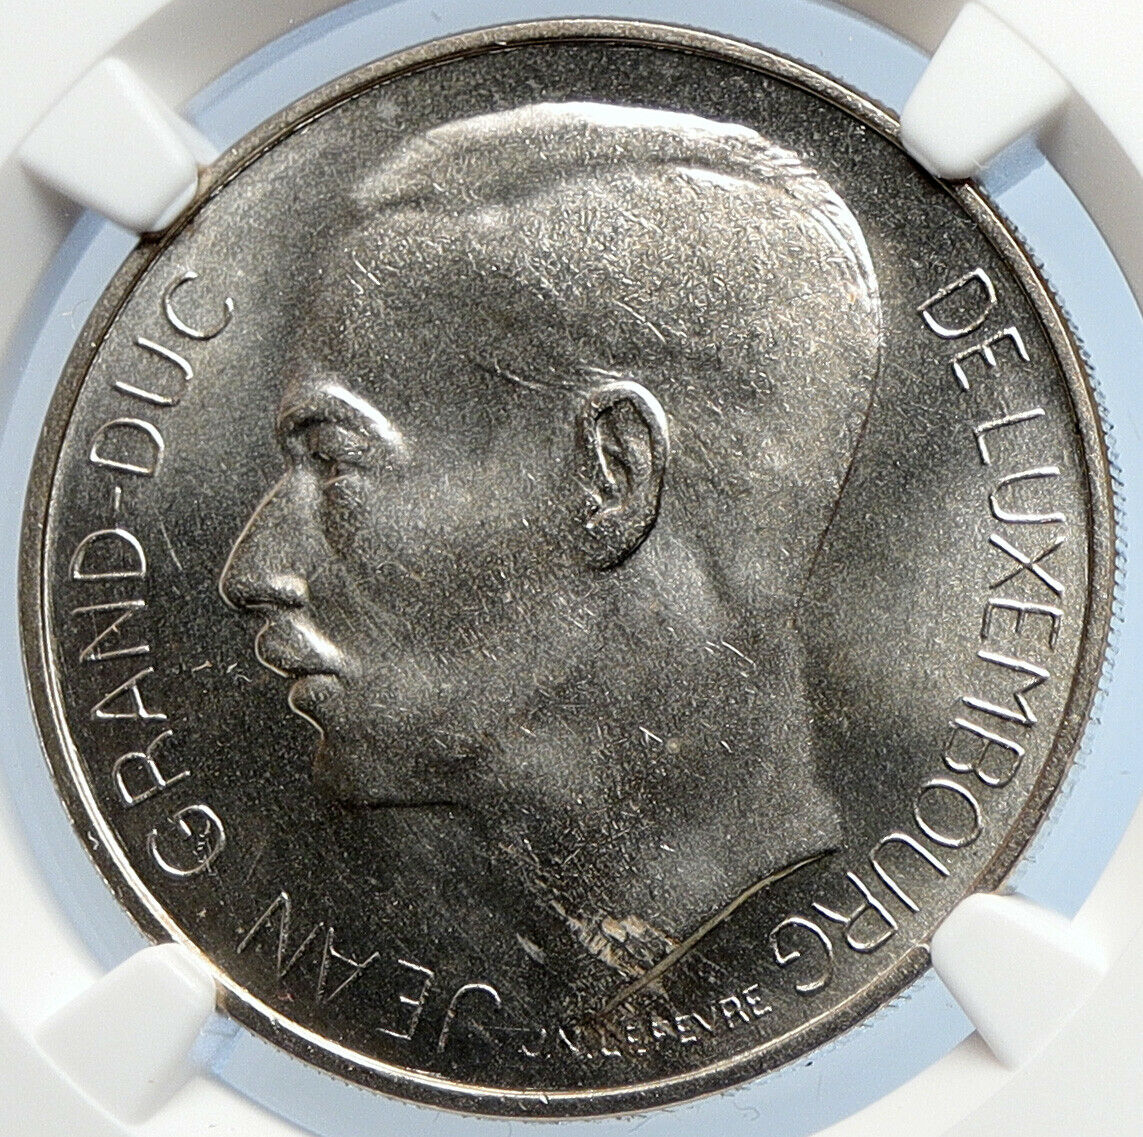 1964 LUXEMBOURG Duchess Charlotte John the Blind Silver 100 Fr Coin NGC i105853